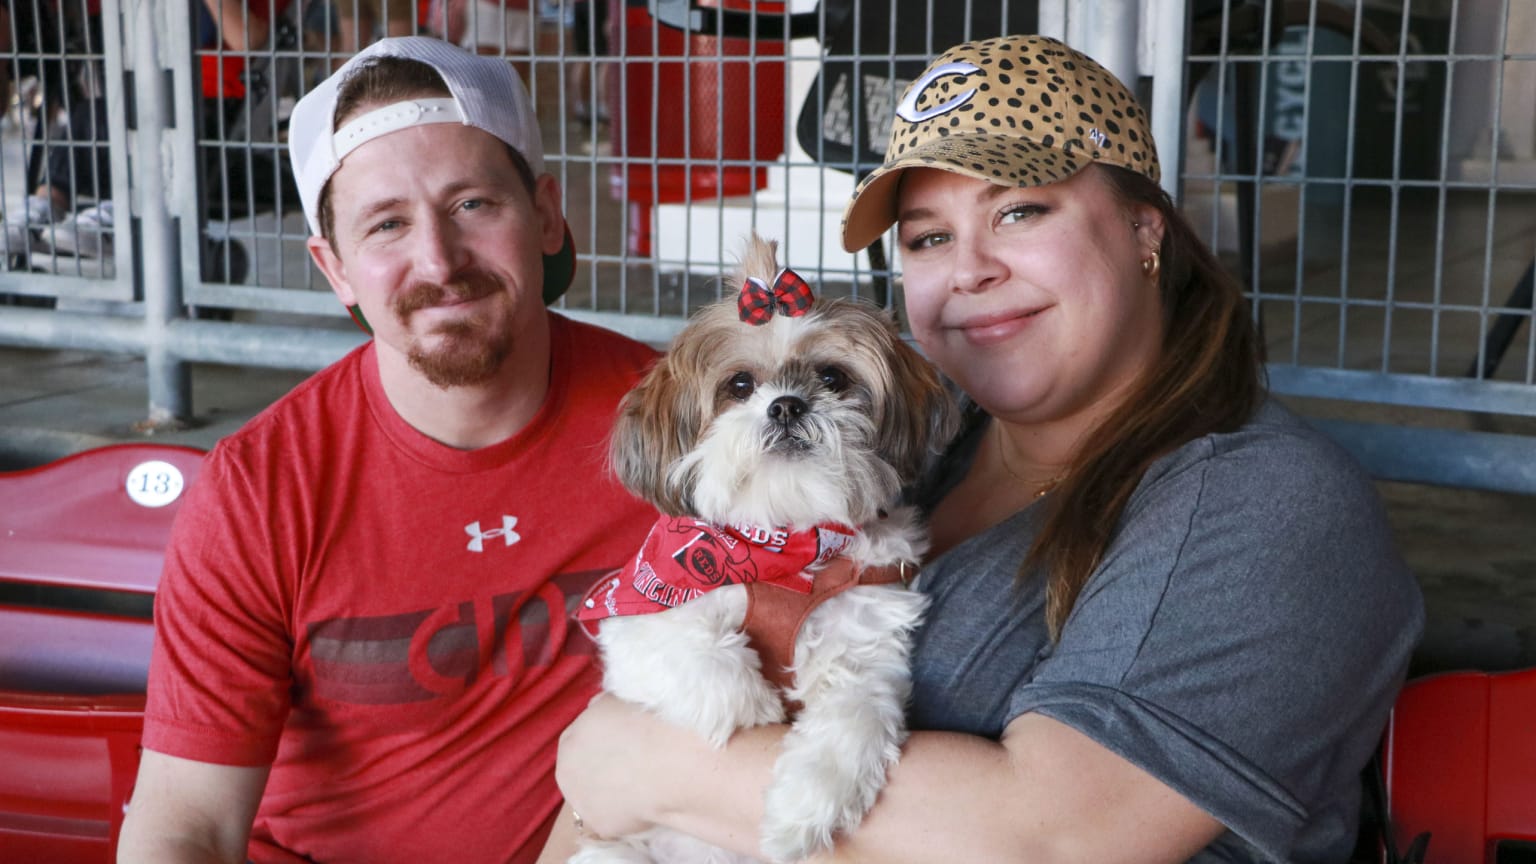 Bobbleheads, Bark in the Park and FOX19 Weather Day; Homestand highlights  at GABP